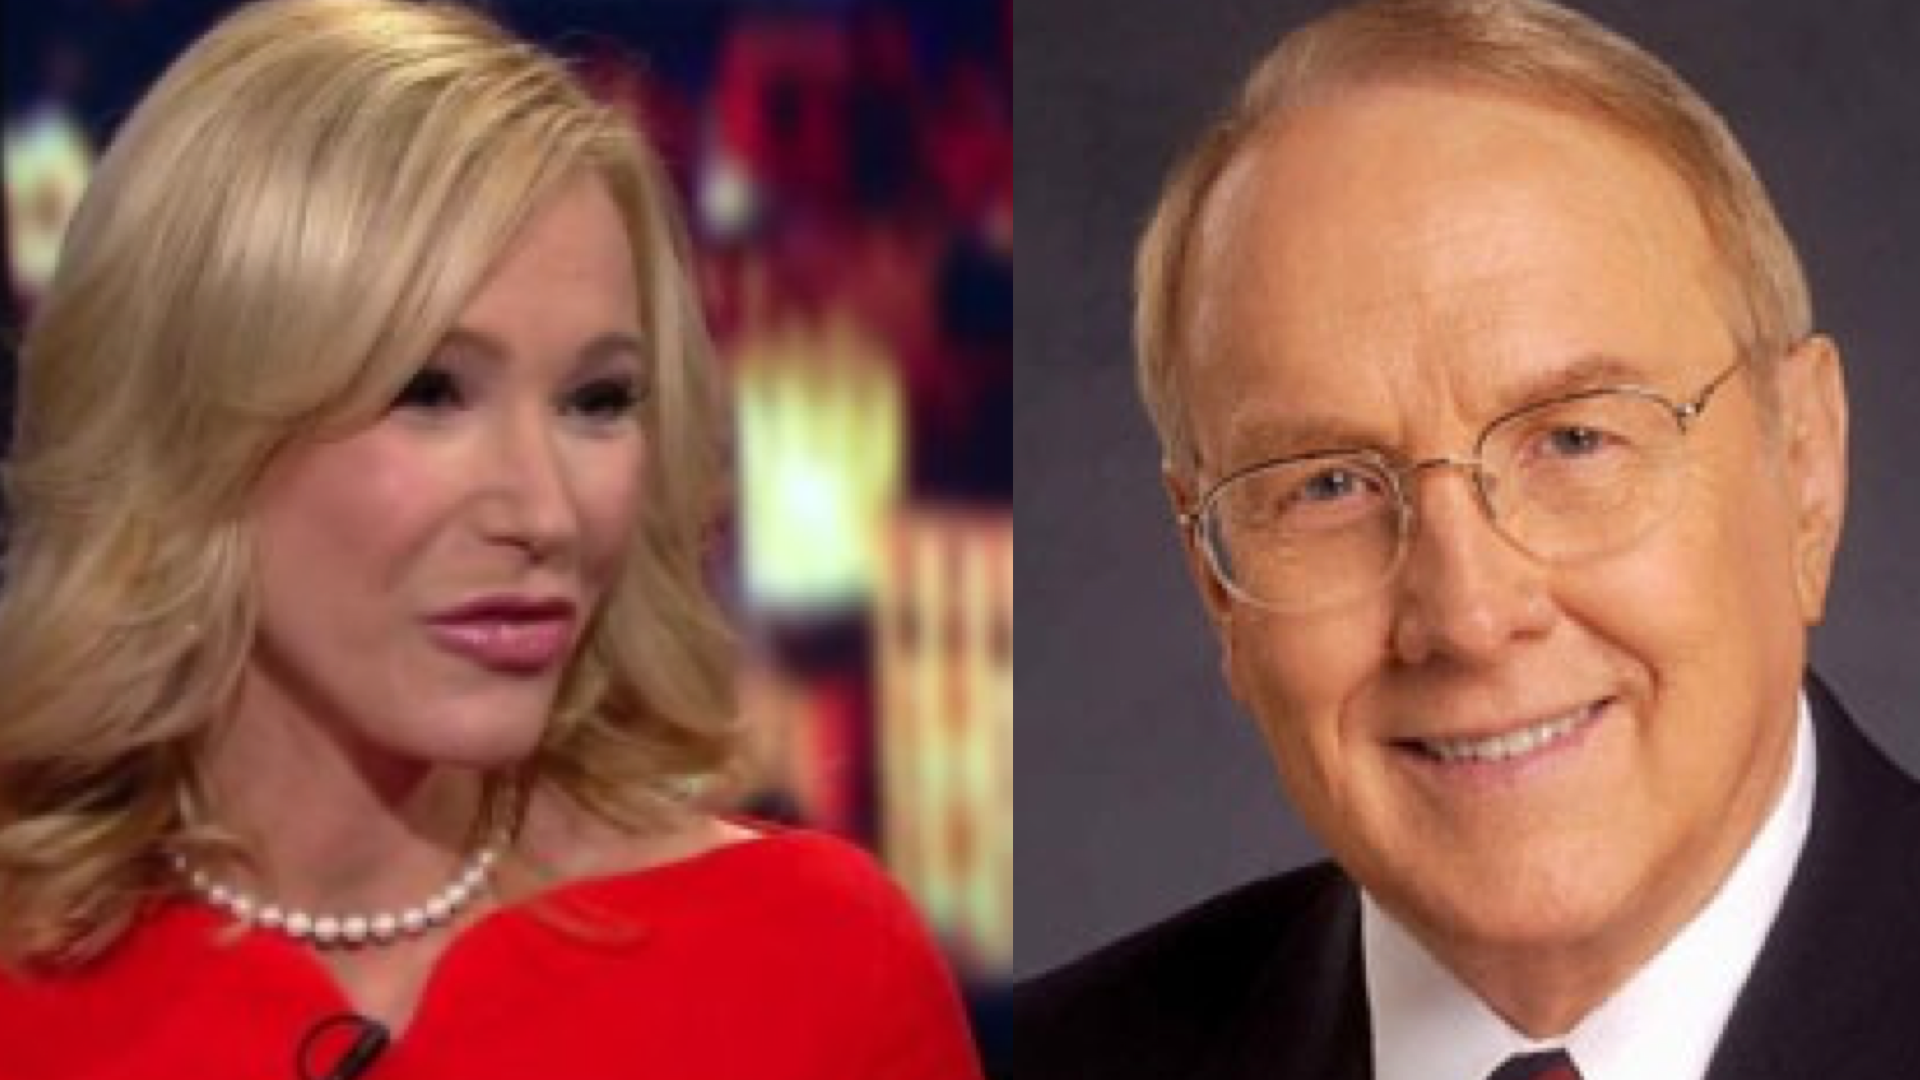 Paula White (left) and James Dobson (right) are both members of President Trump's evangelical council who took part in conference calls on SBA loans for religious organizations.